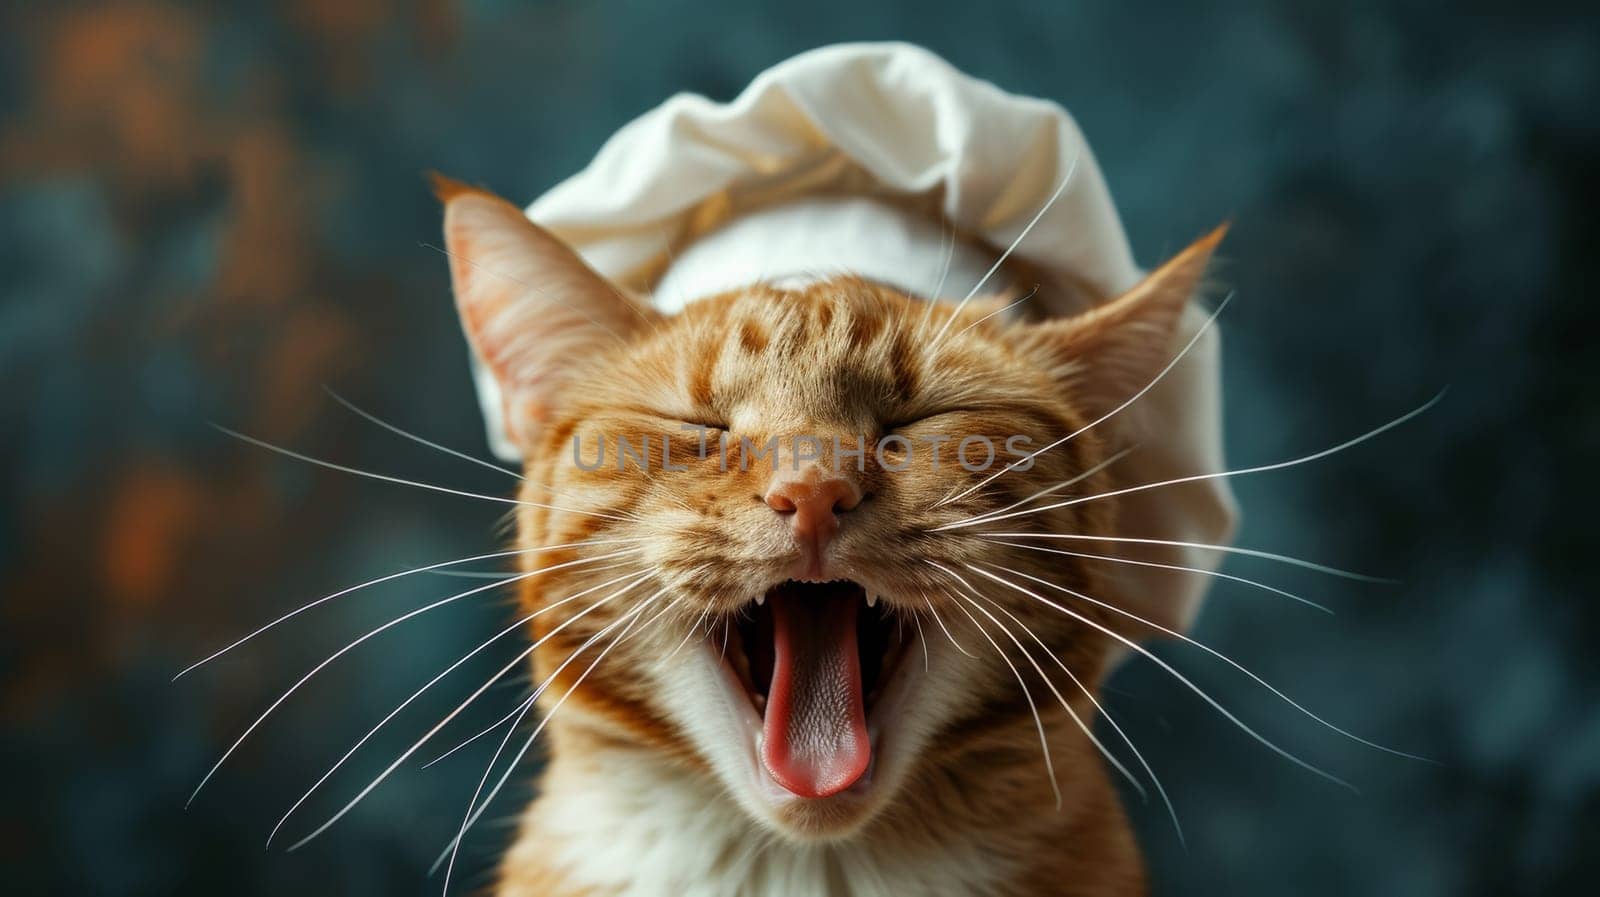 A cat wearing a chef's hat with its mouth open, AI by starush